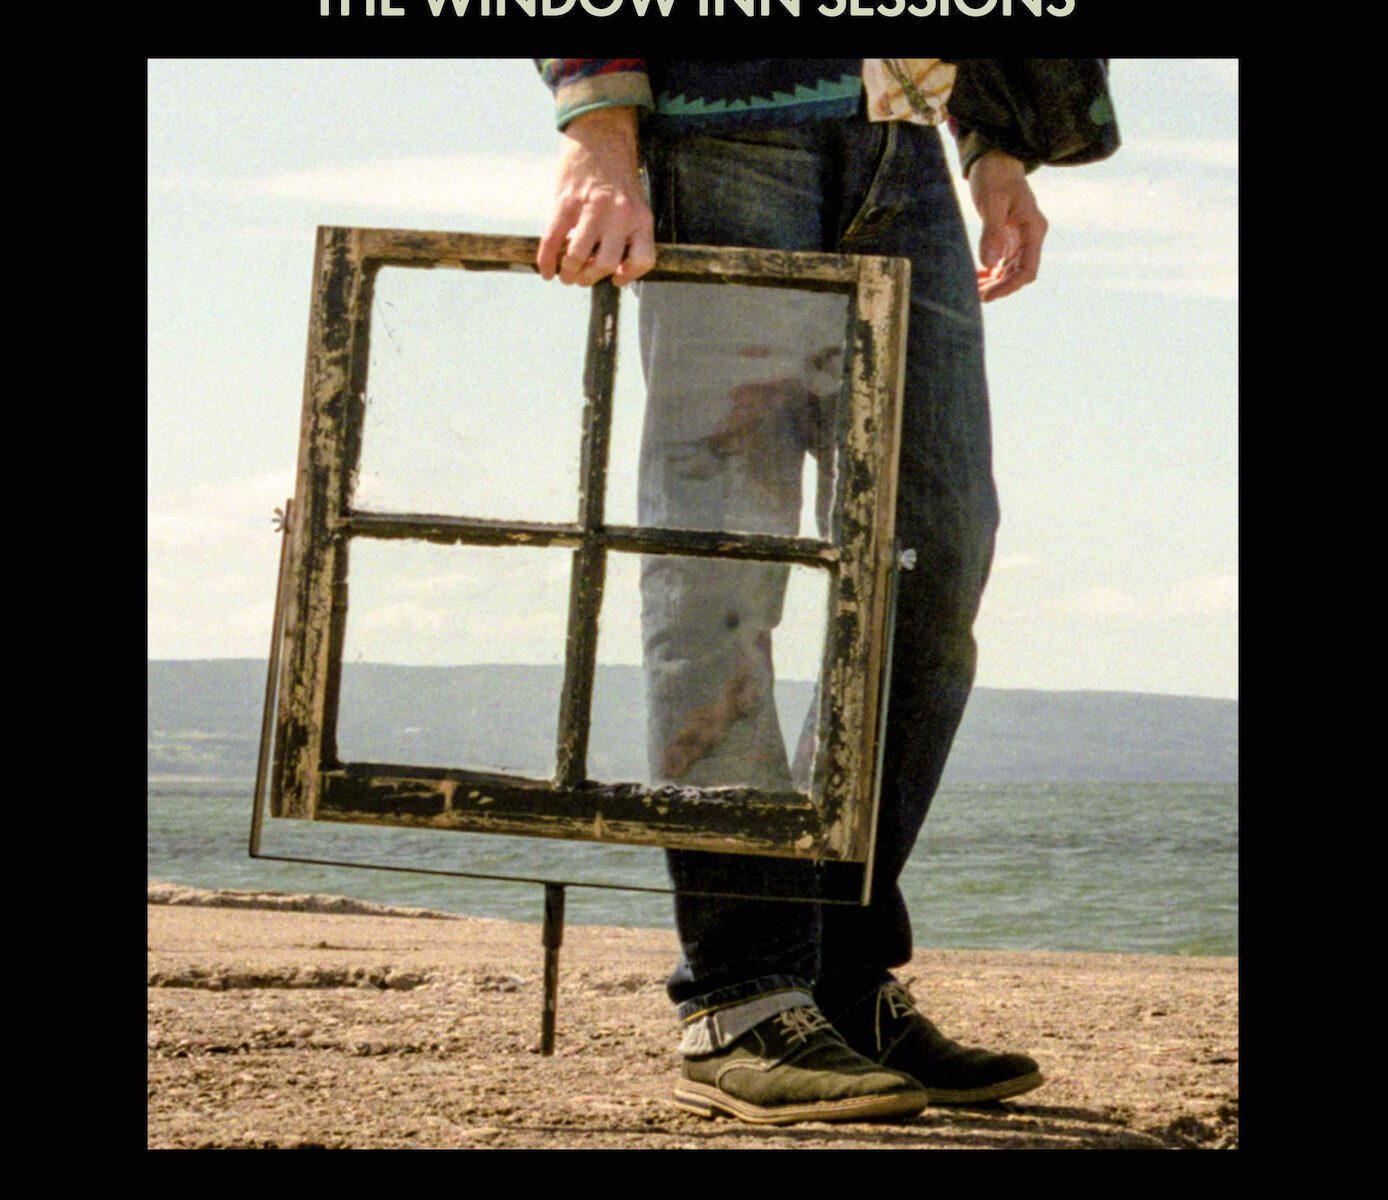 The Window Inn Sessions cover for Joel Plaskett featuring a man holding a square old-fashioned window down by his side